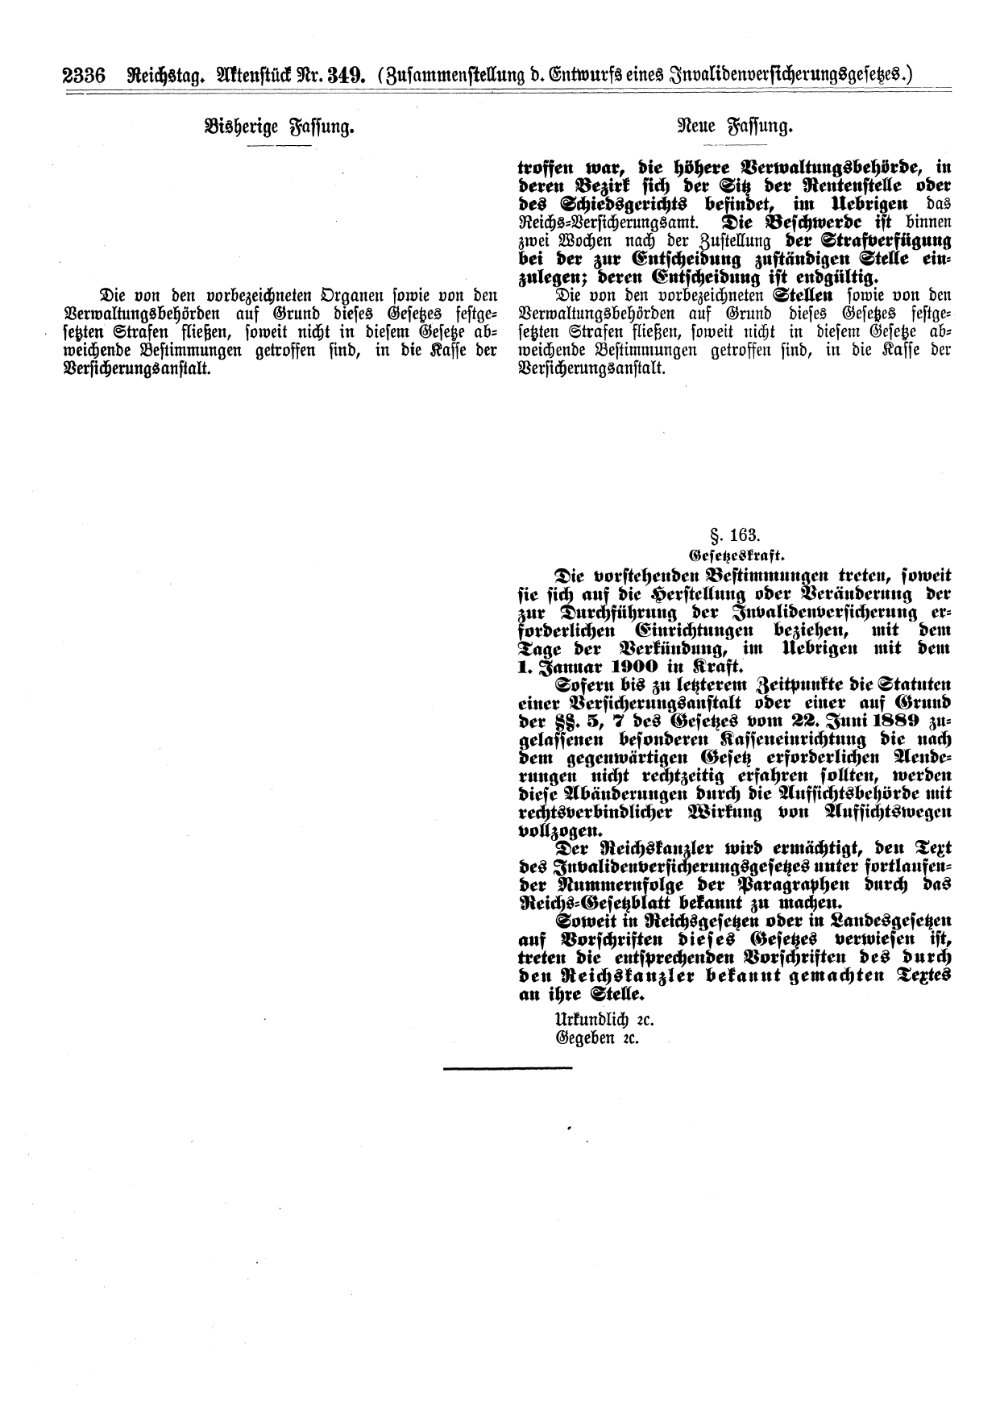 Scan of page 2336